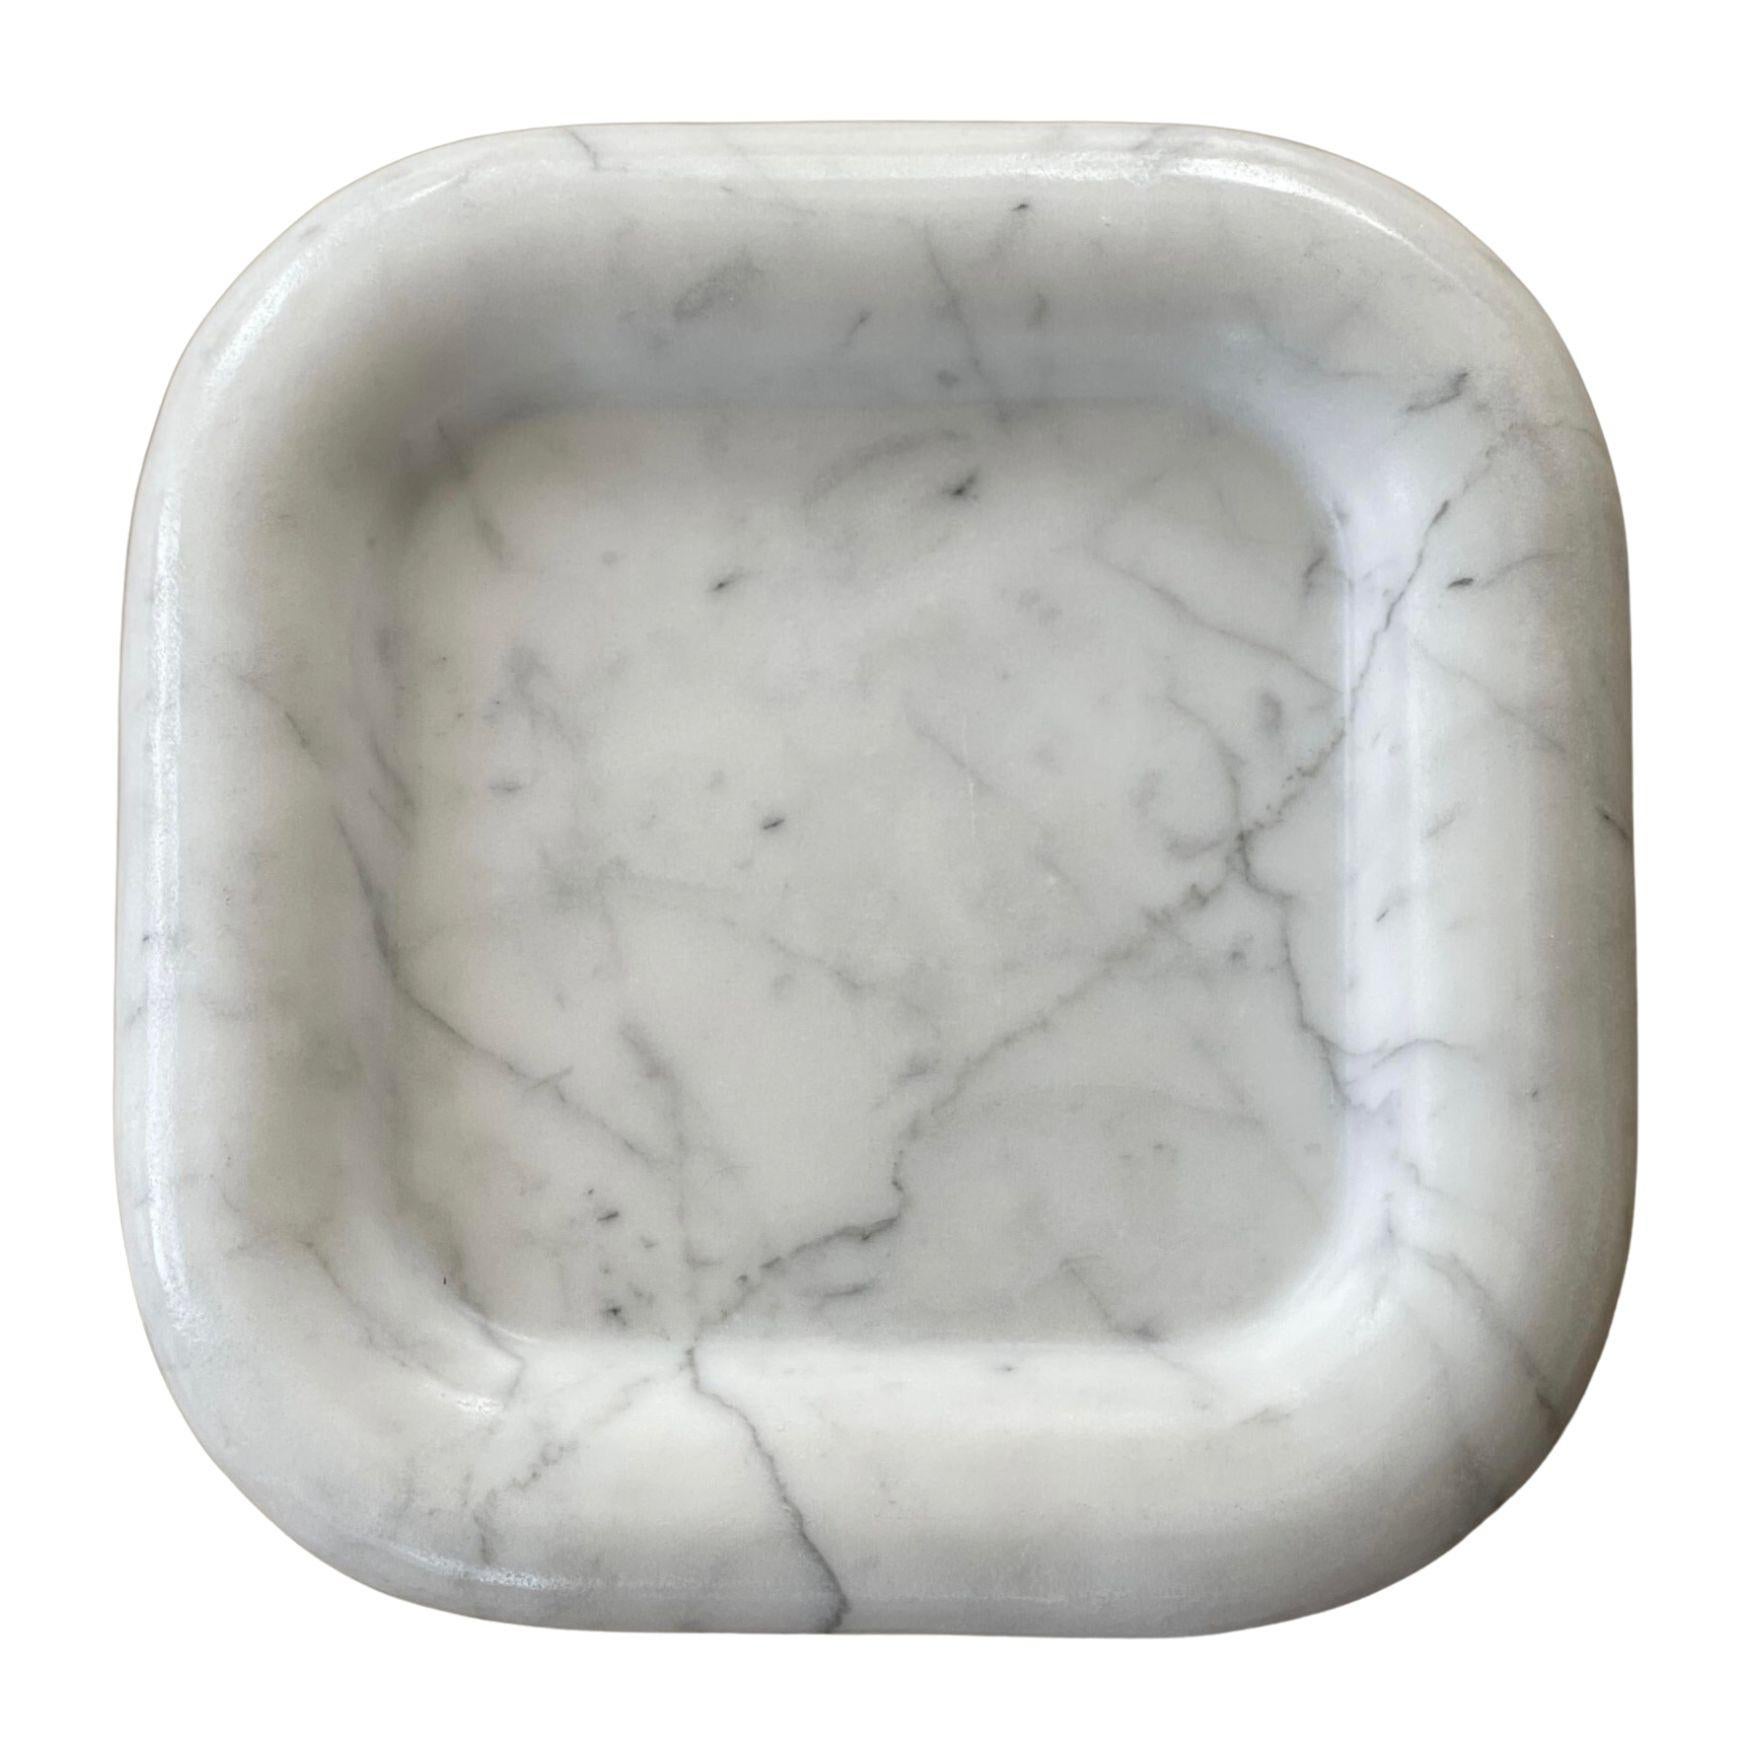 Organic Modern Ty Catch: Square Puffed Edge Catchall in White Cloud Marble by Anastasio Home For Sale